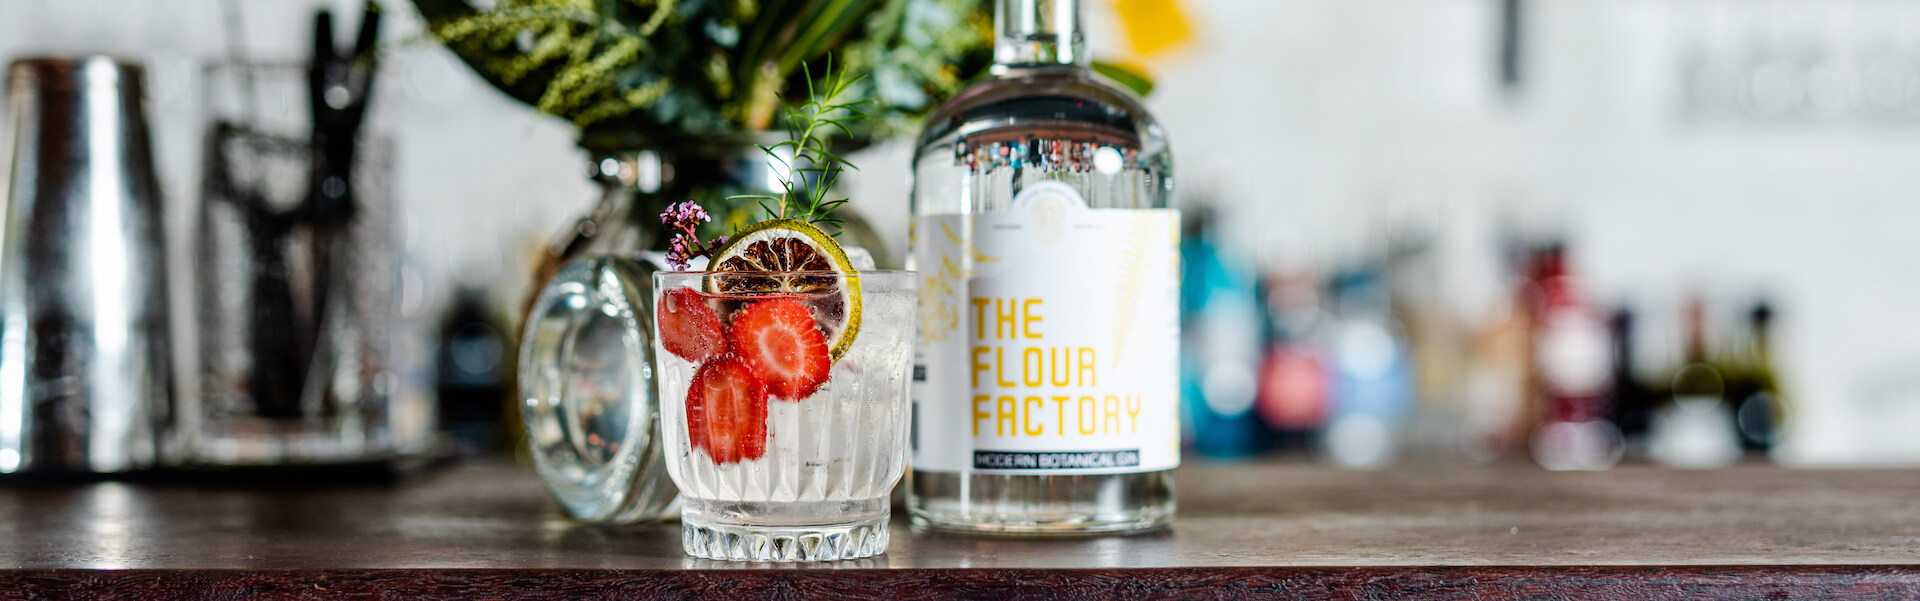 The flour factory new gin